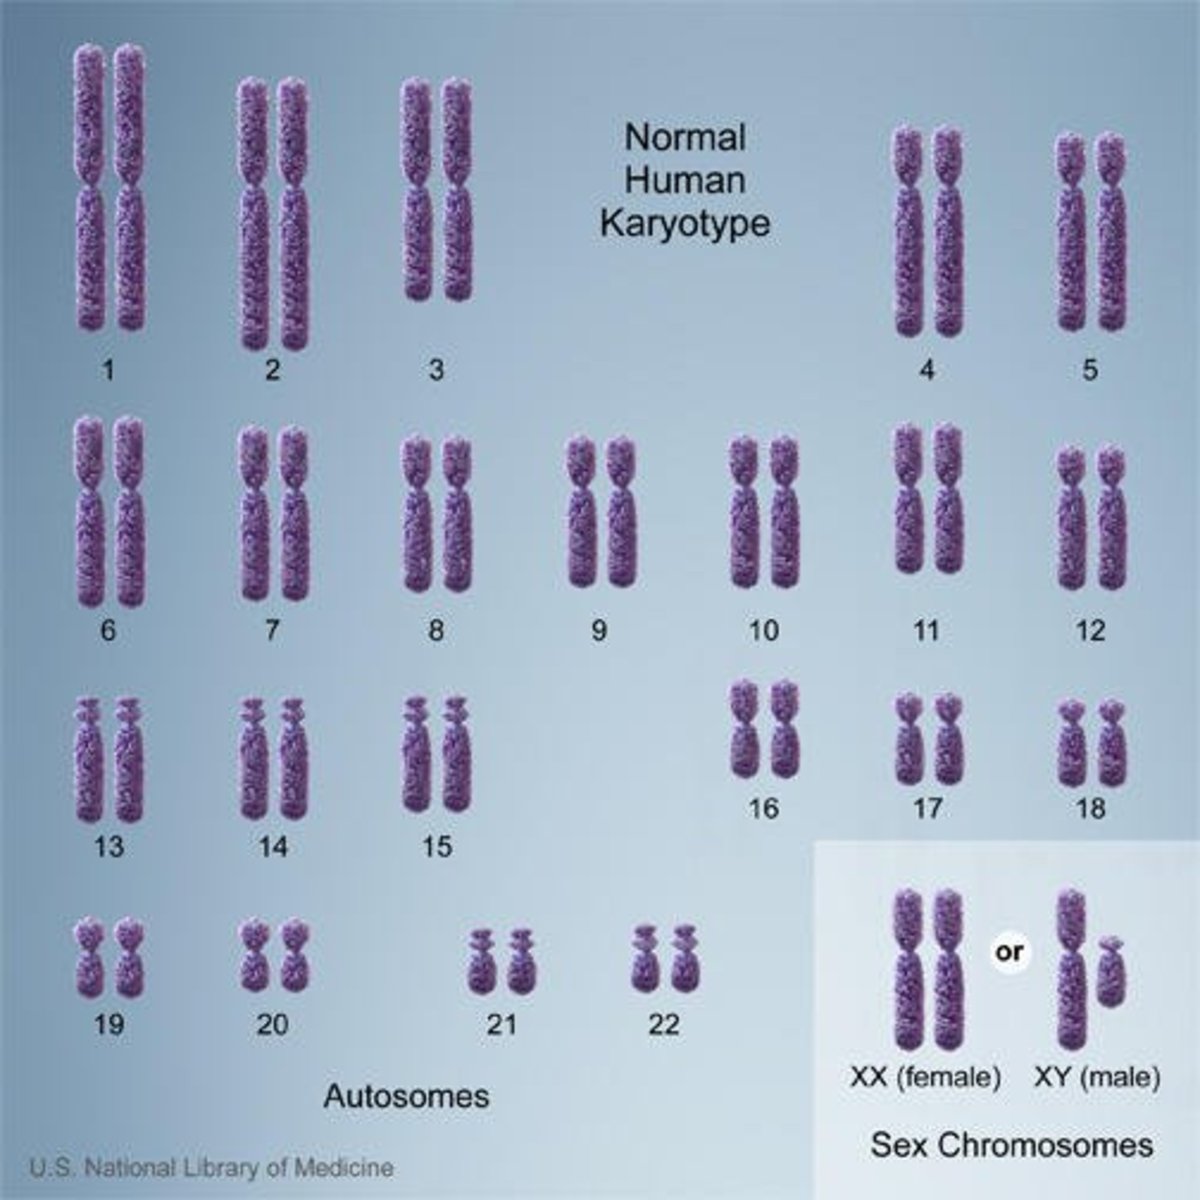 Normal chromosomes of a human. Note the XX chromosomes for female and the XY chromosomes for male. The male Y chromosome is much smaller than the X chromosome that it is paired with.